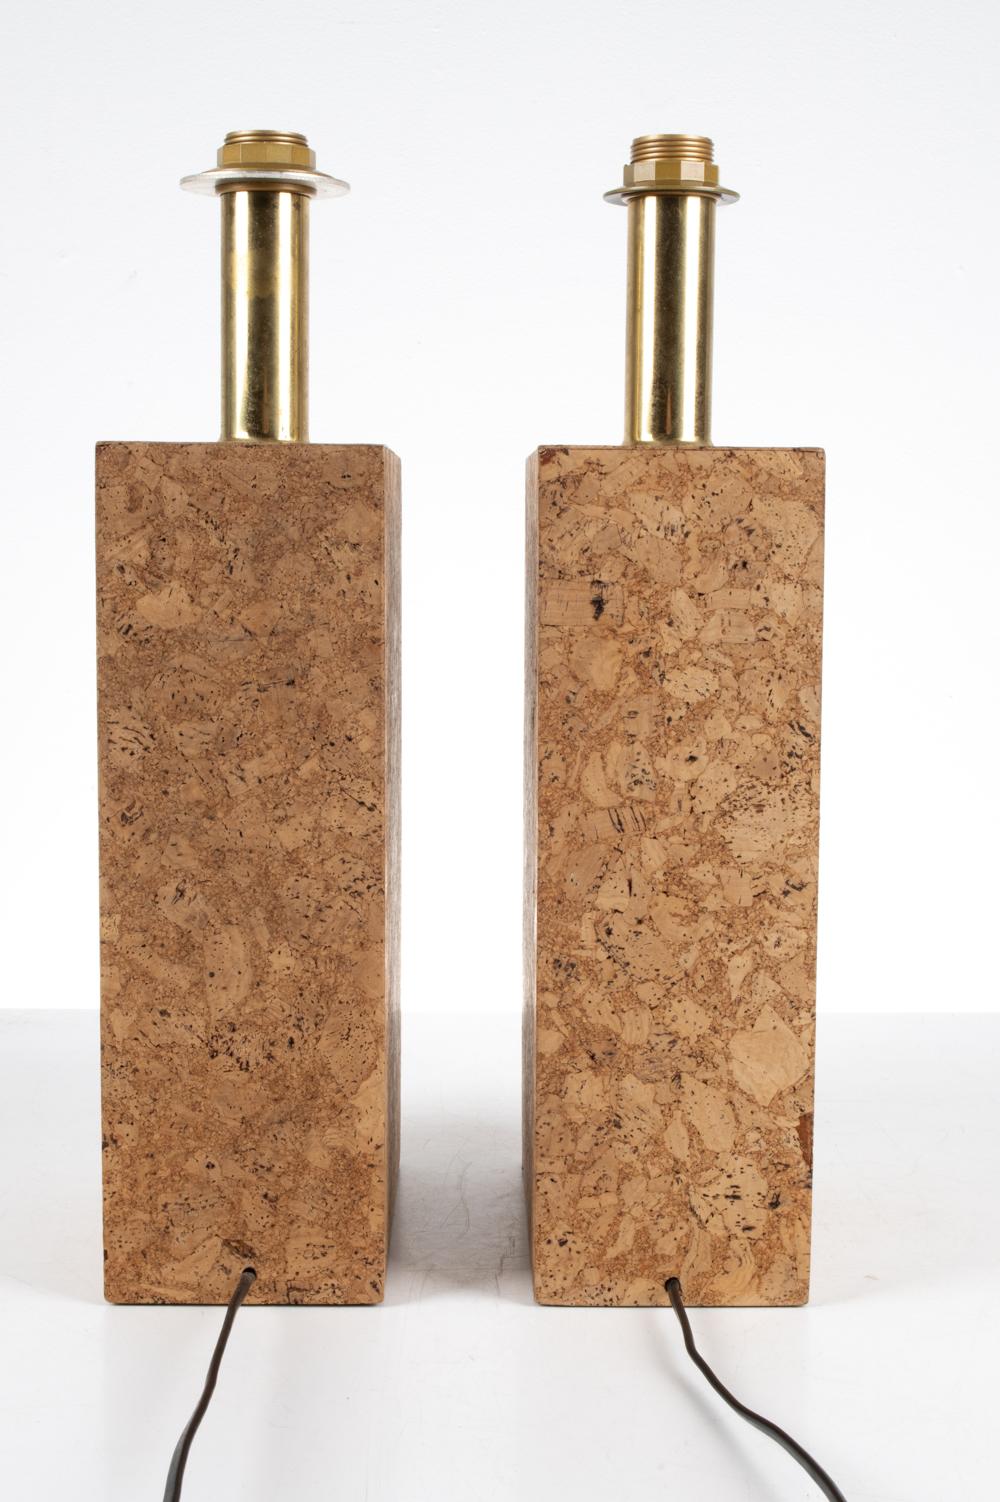 Pair of Cork Monolith Table Lamps in the Stye of Ingo Maurer, c. 1970's For Sale 8